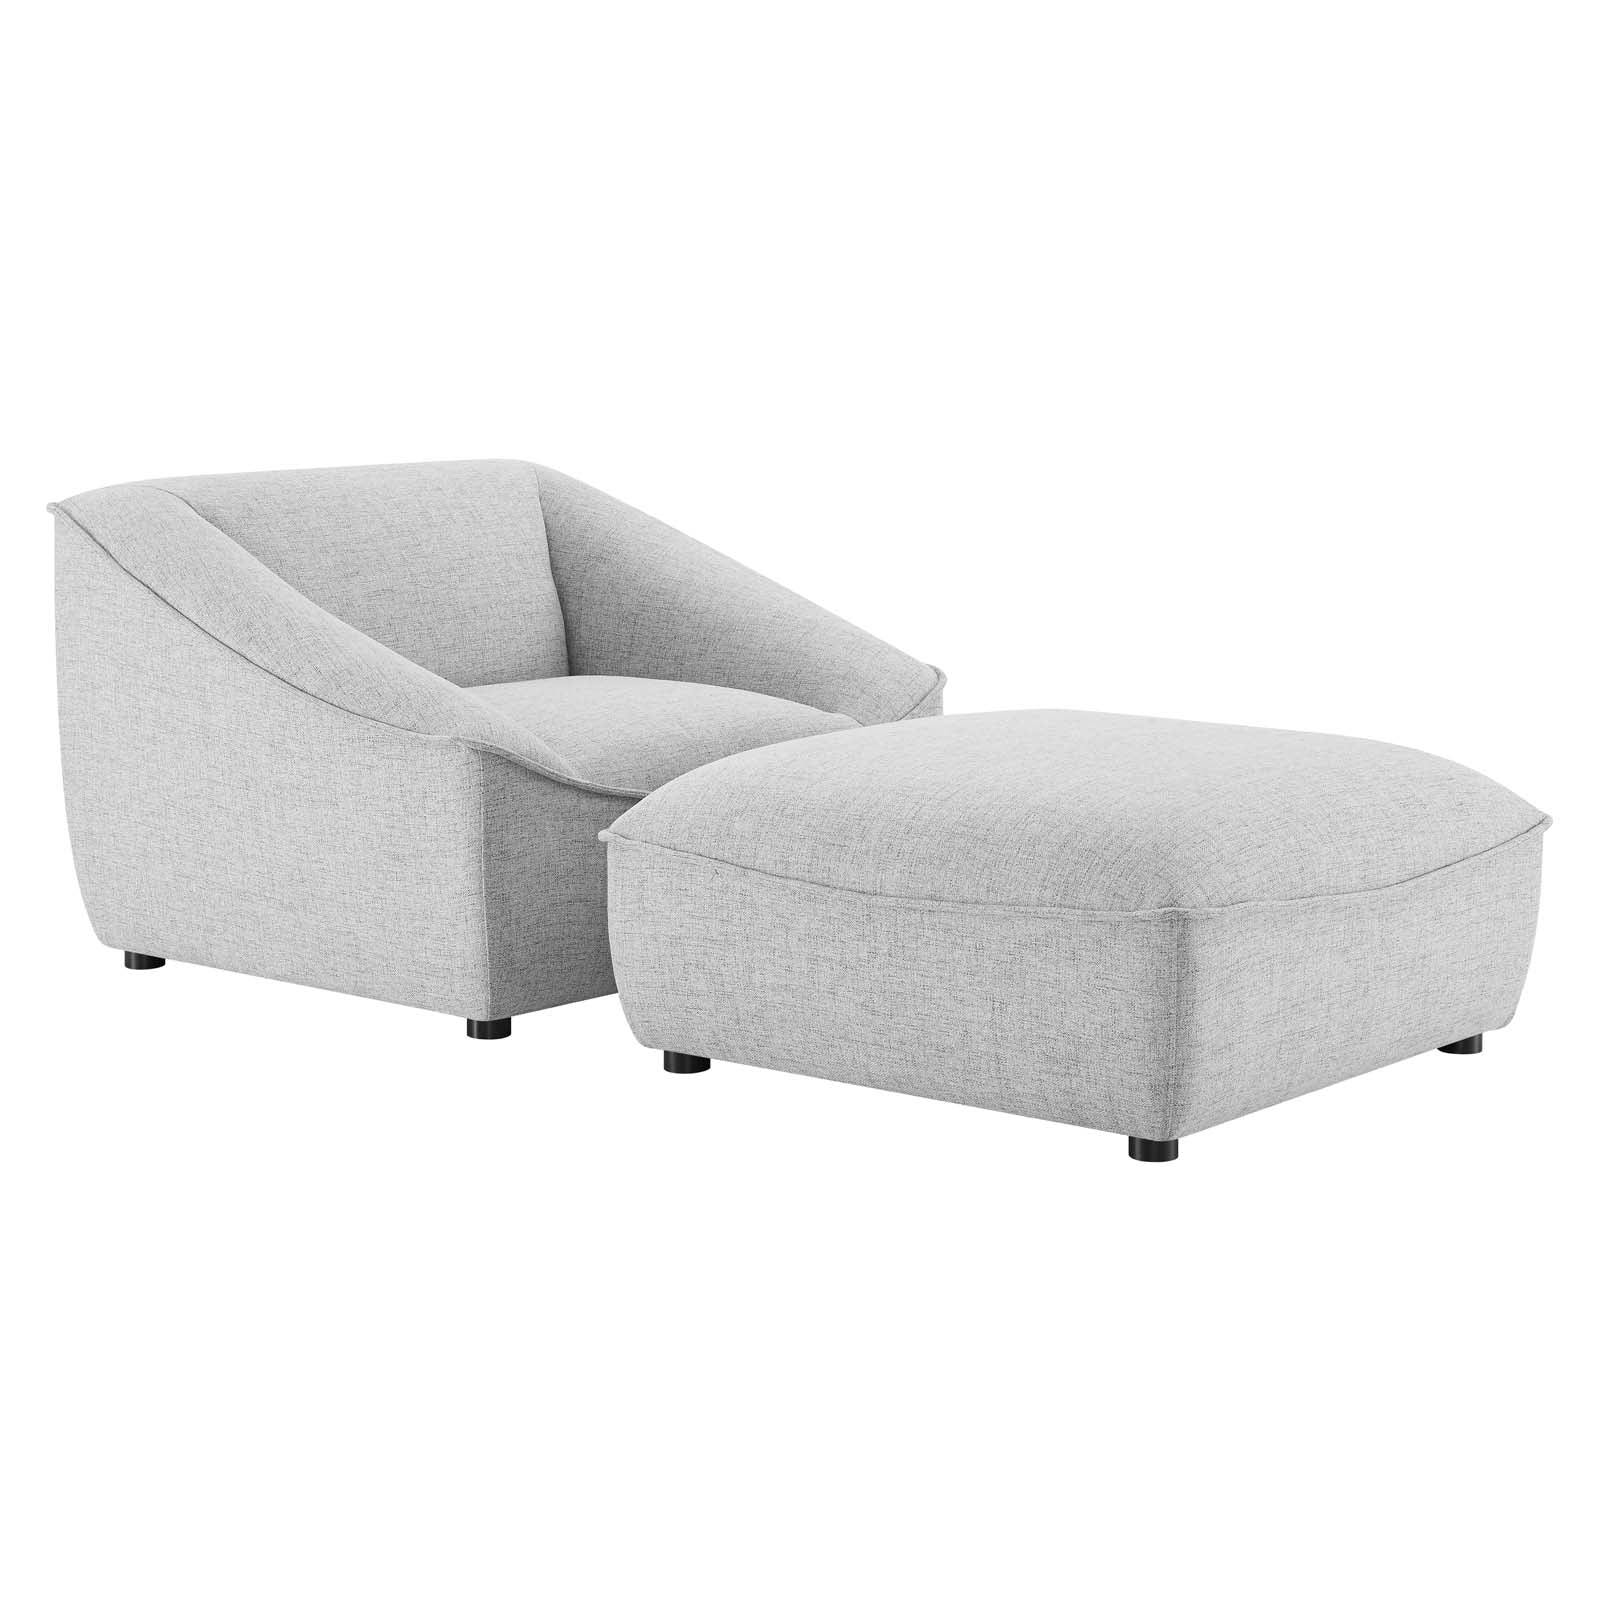 Comprise 2-Piece Living Room Set - East Shore Modern Home Furnishings